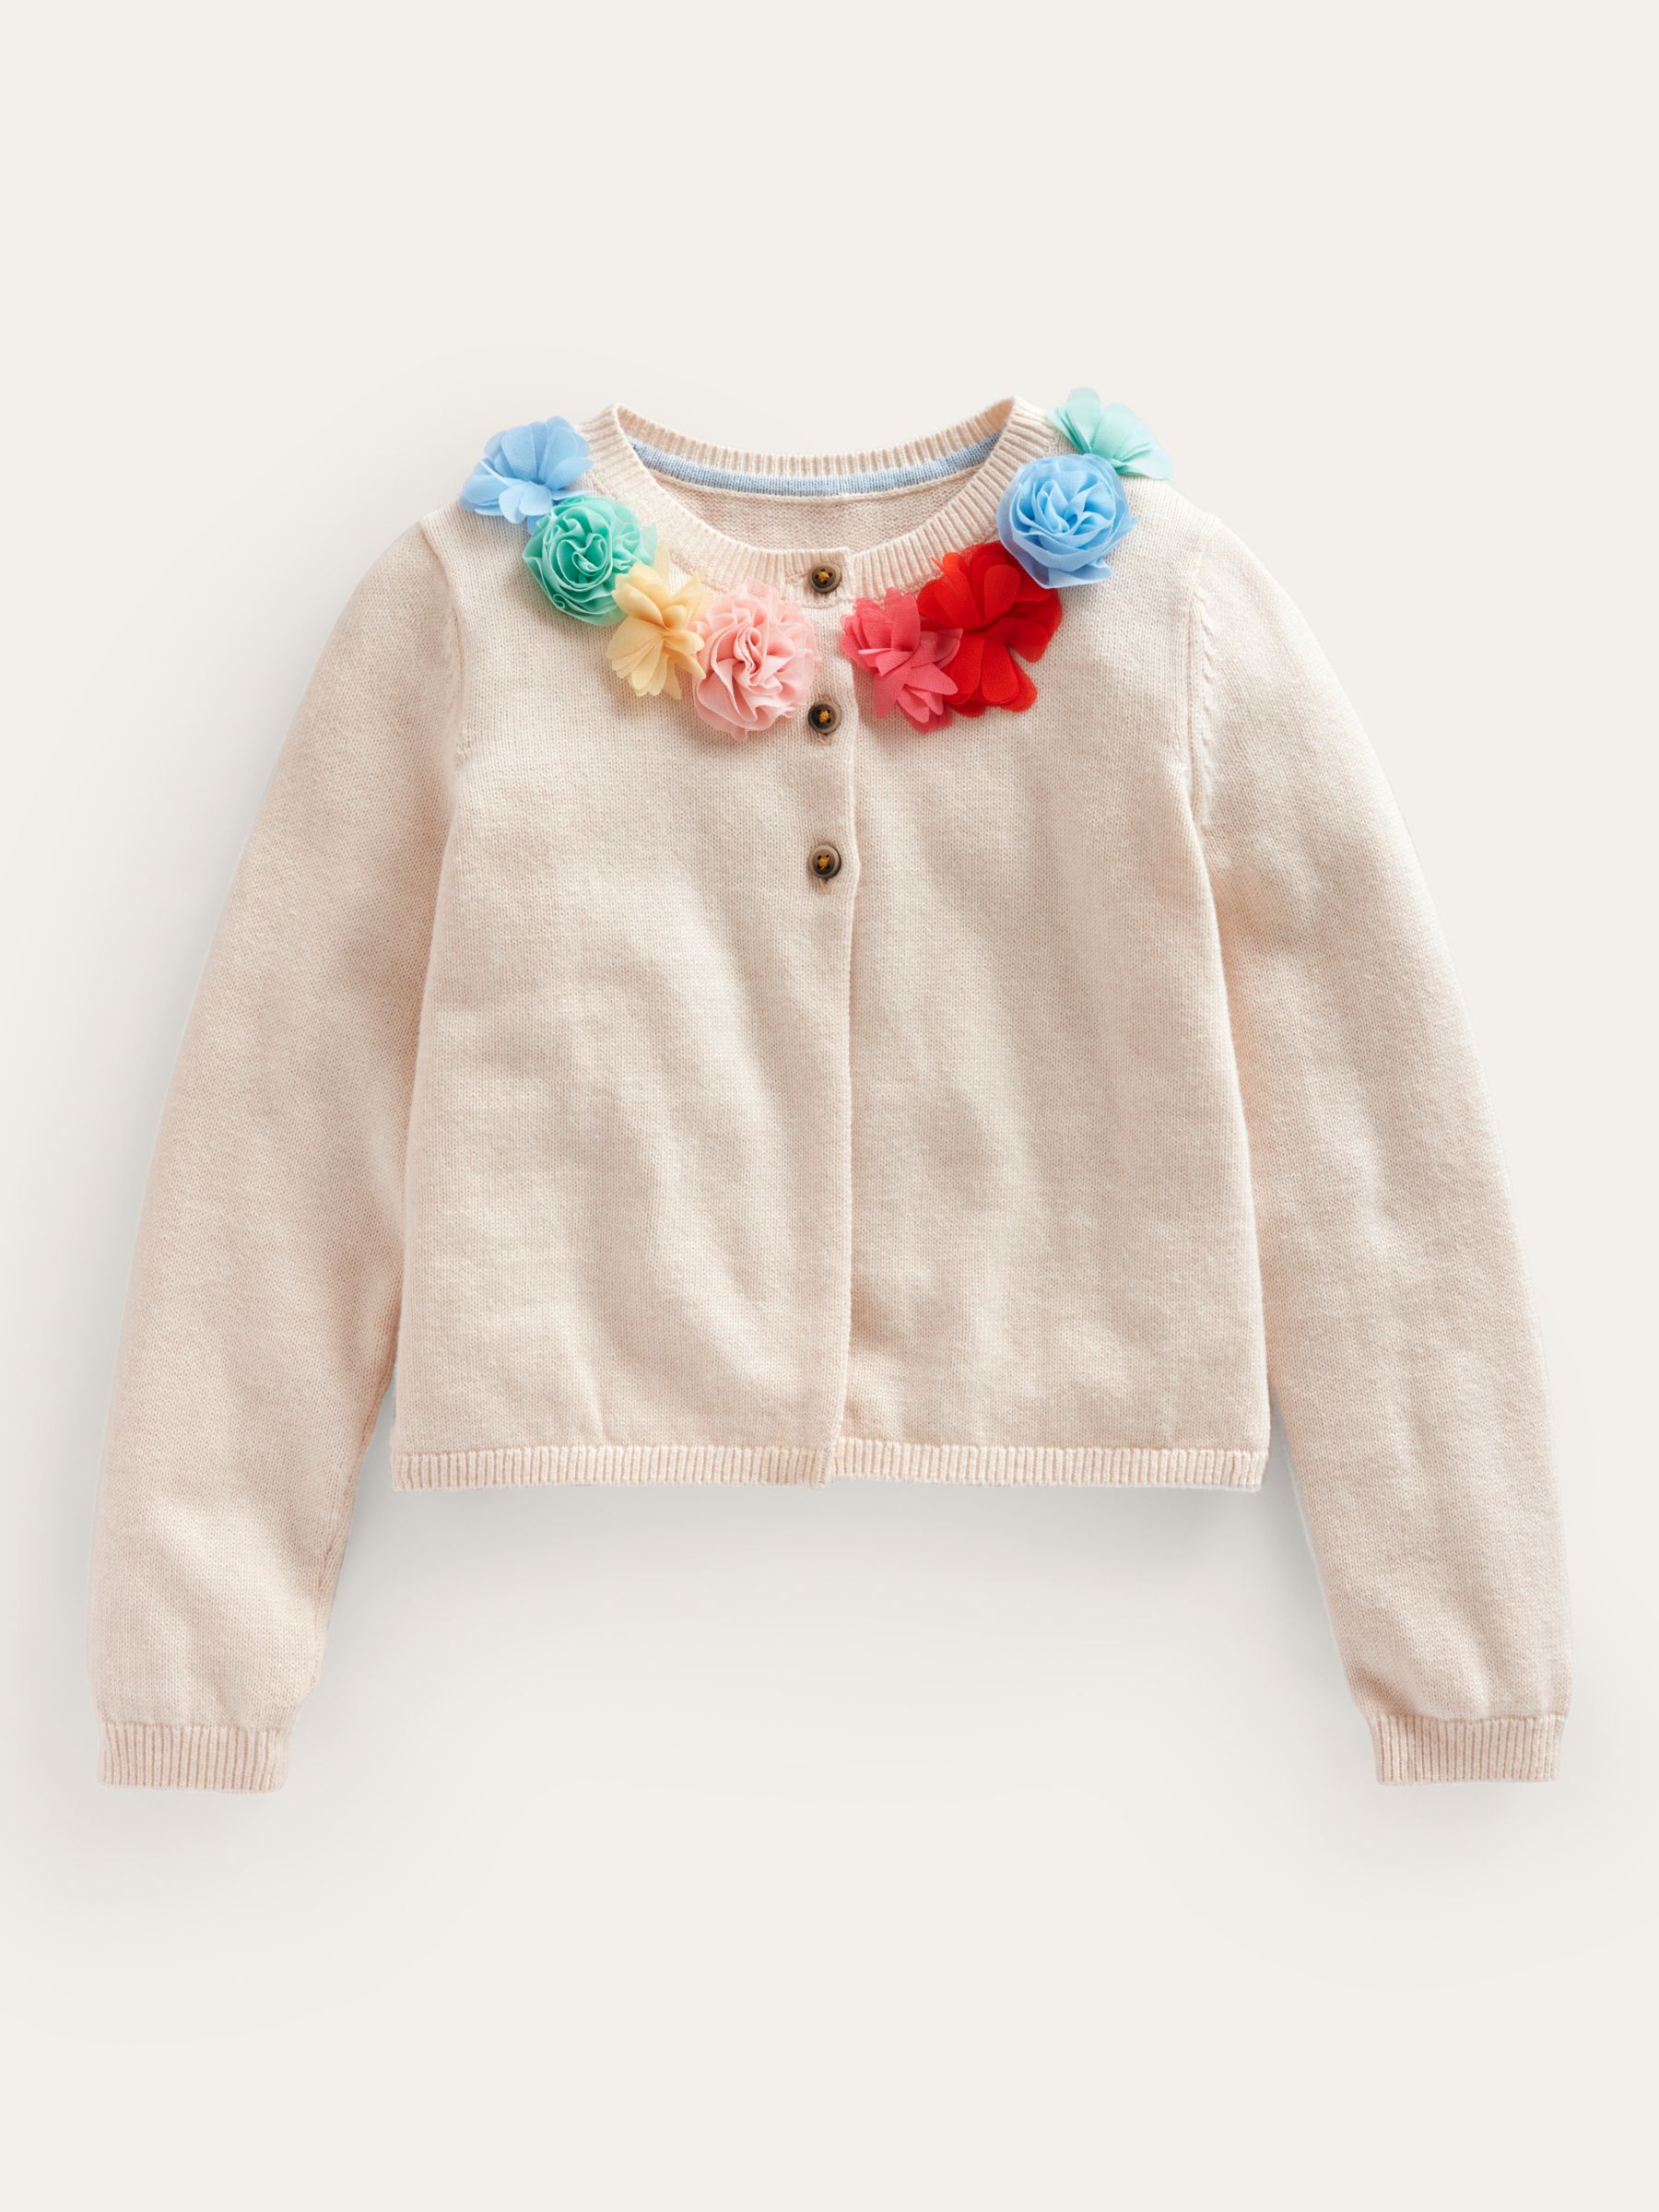 Mini Boden Kids' Occasion Tulle Flower Cardigan, Ivory, 2-3 years